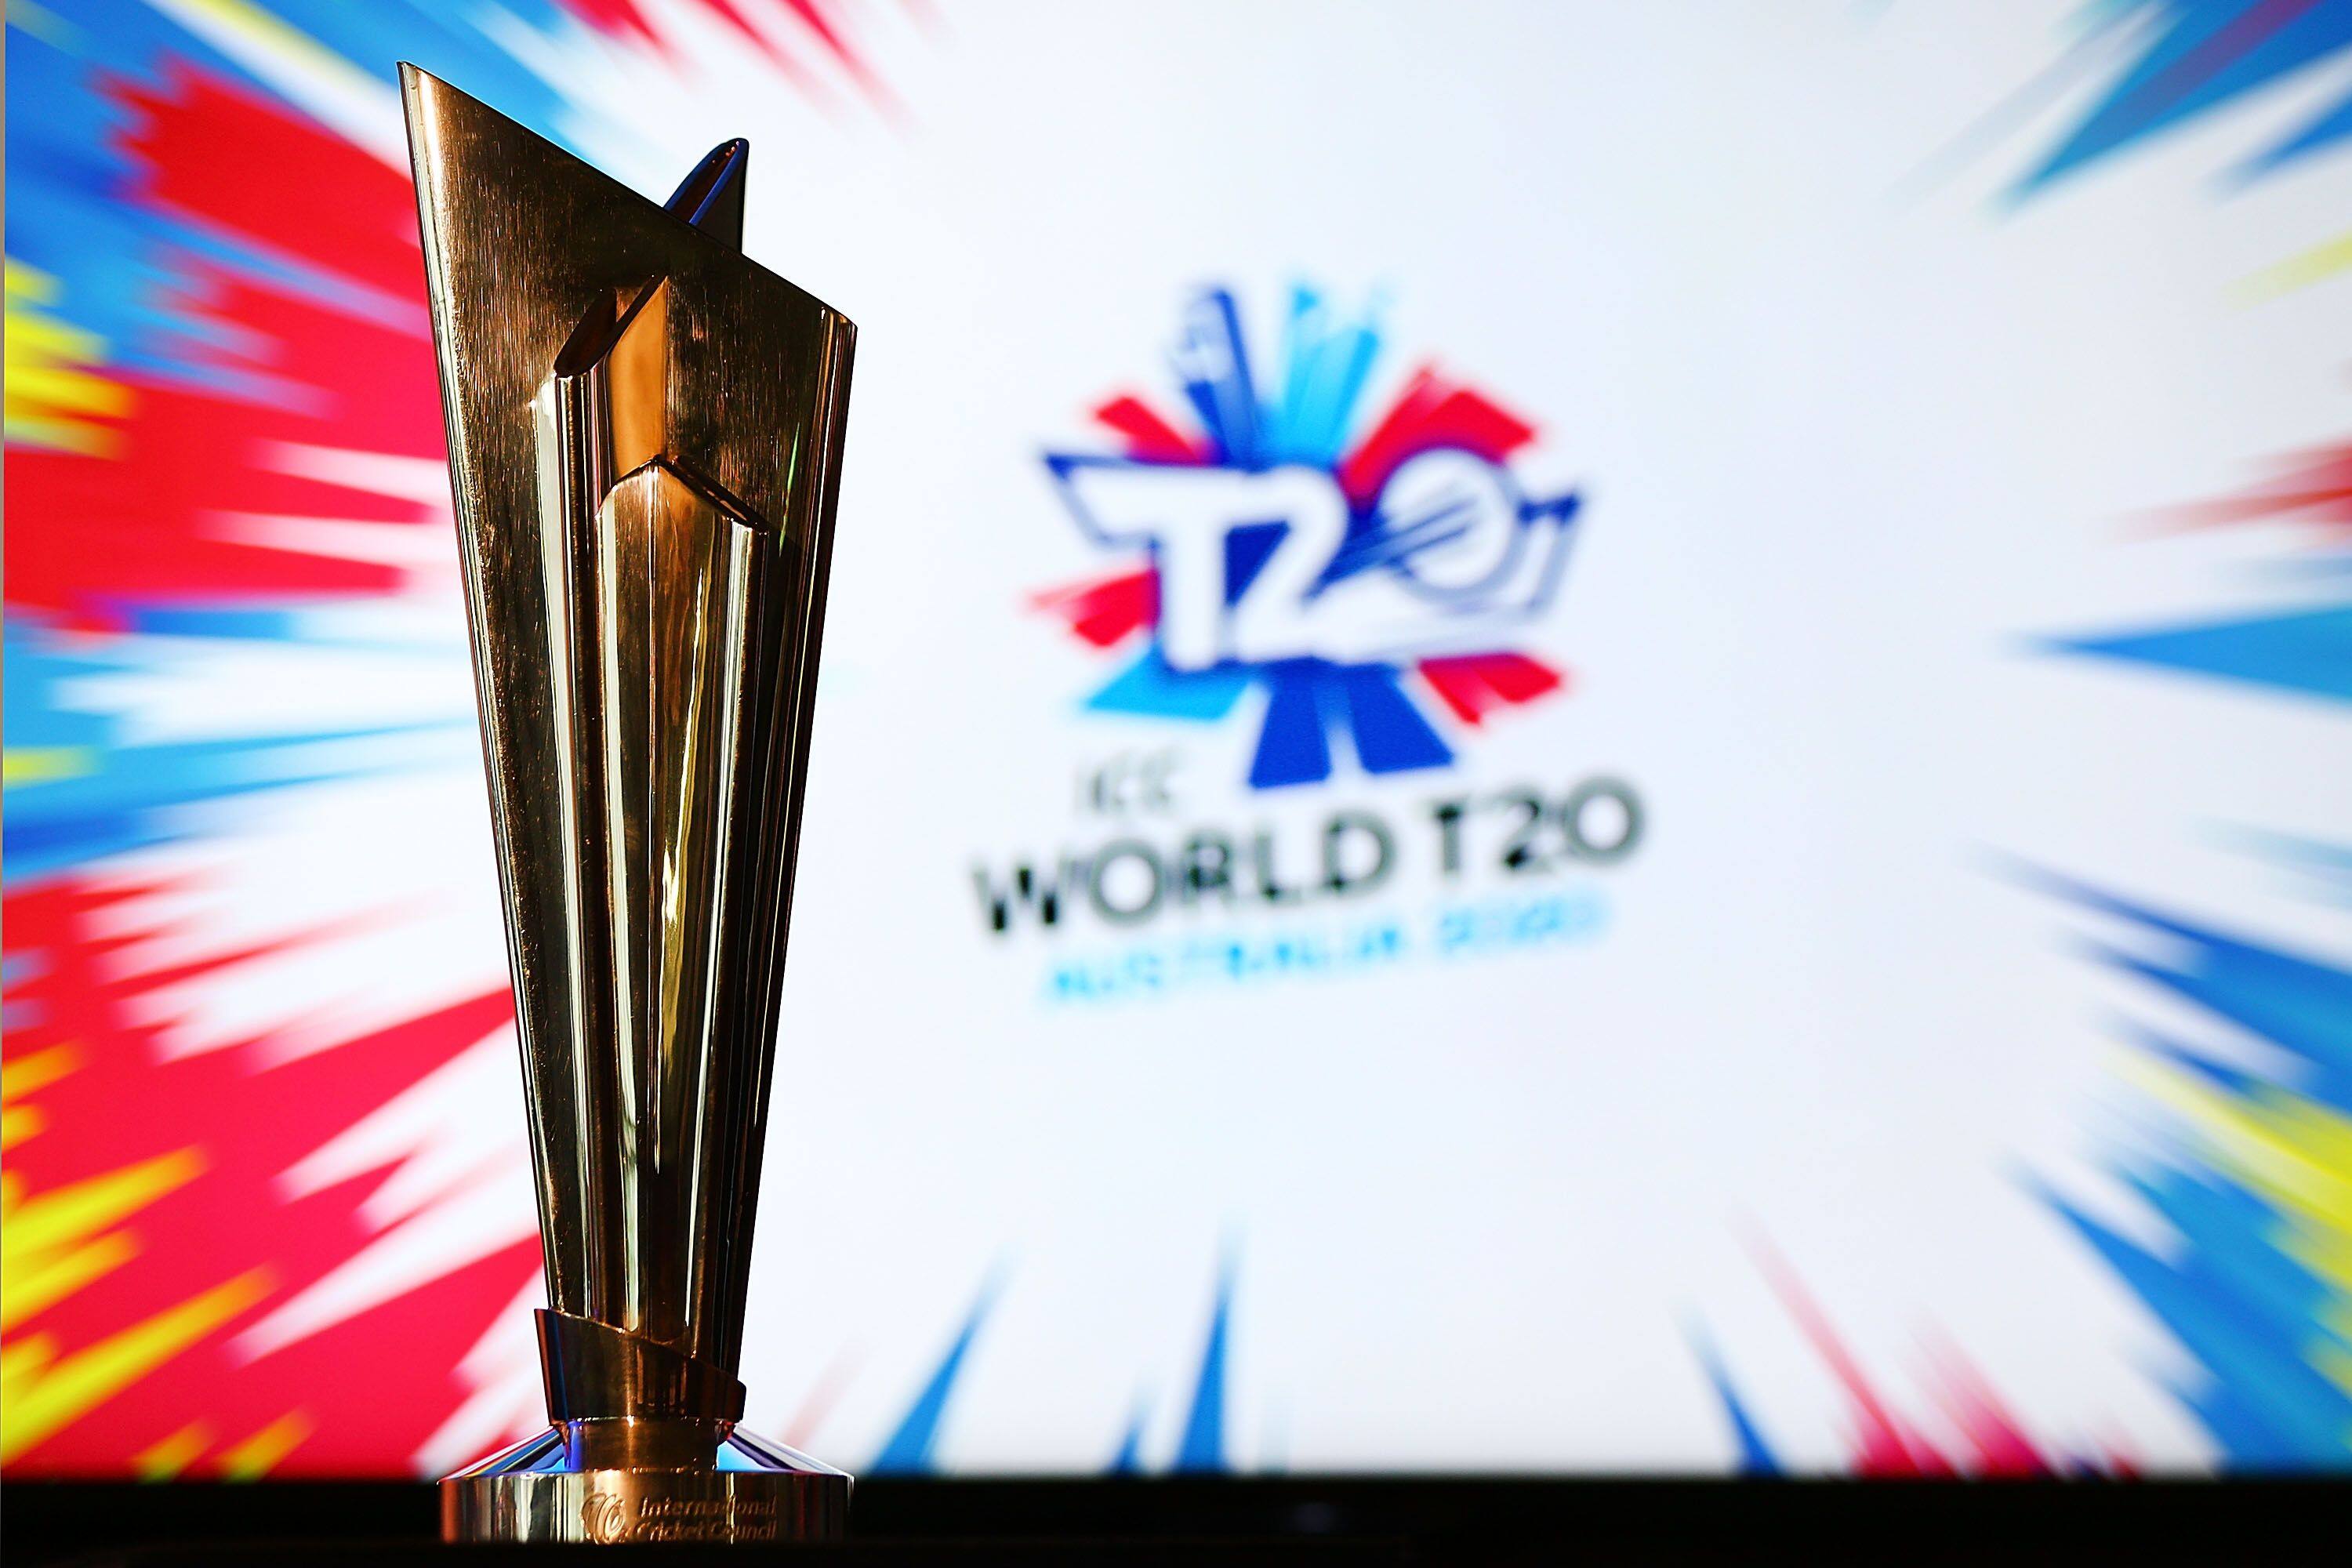 ICC expect T20 World Cup 2020 to be held on schedule